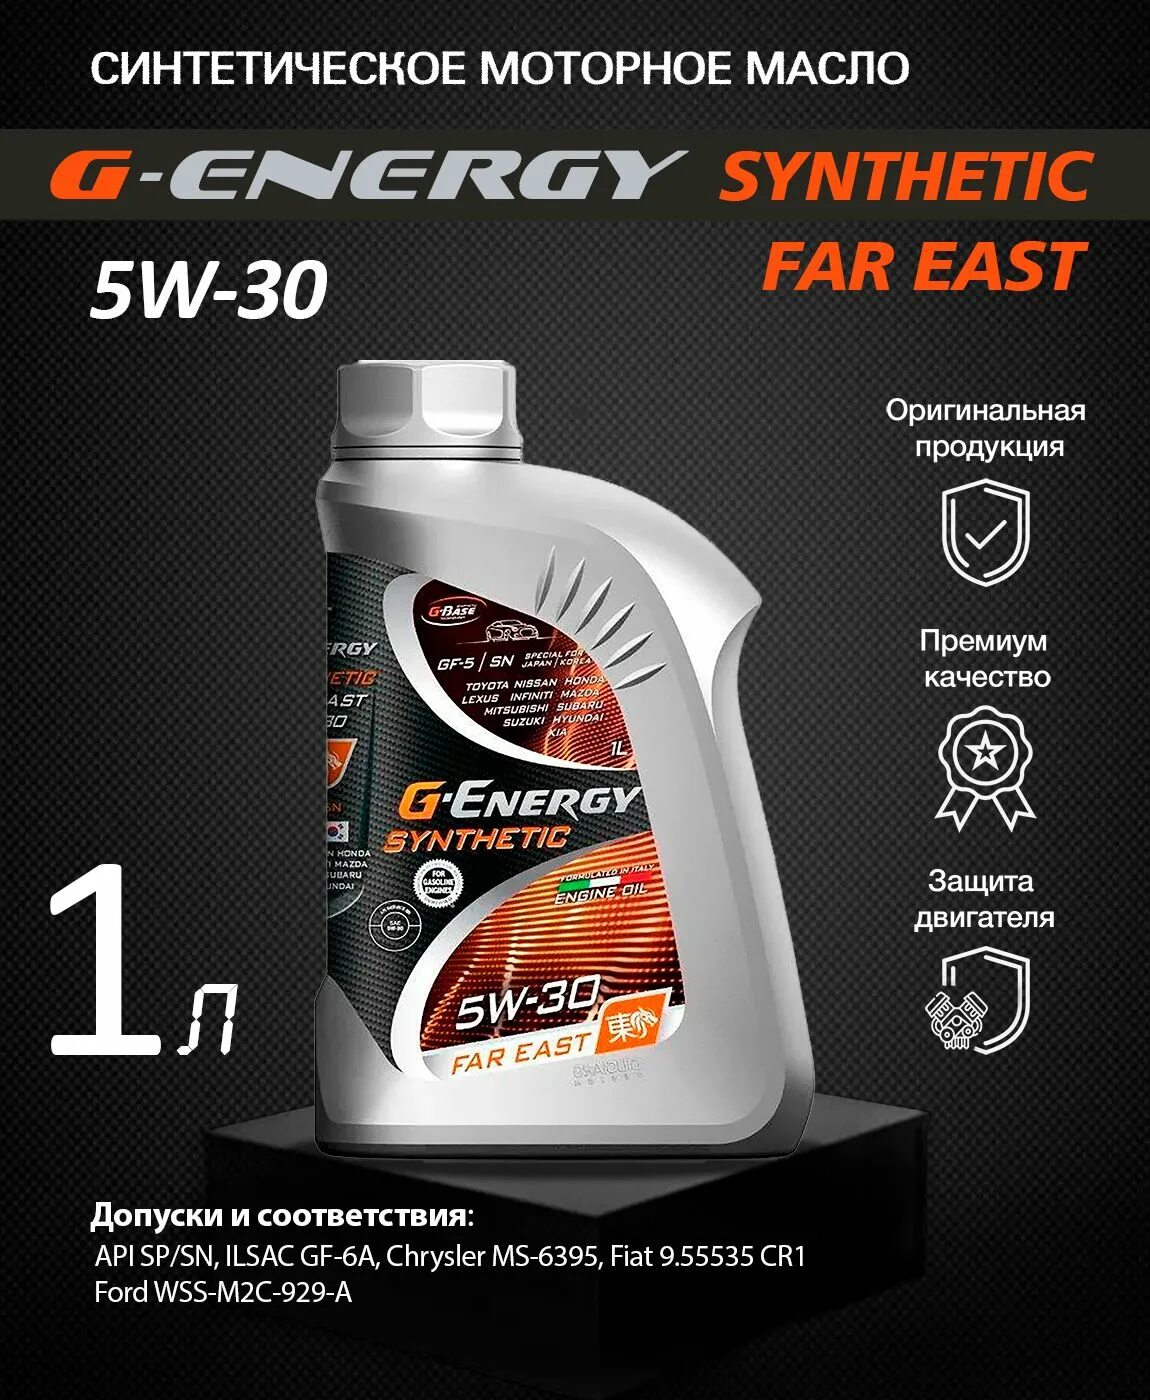 G-Energy Synthetic Active 5w-30. G Energy 5w40 Актив. G-Energy Synthetic Active 5w-40. Масло g-Energy Synthetic super start 5w-30.